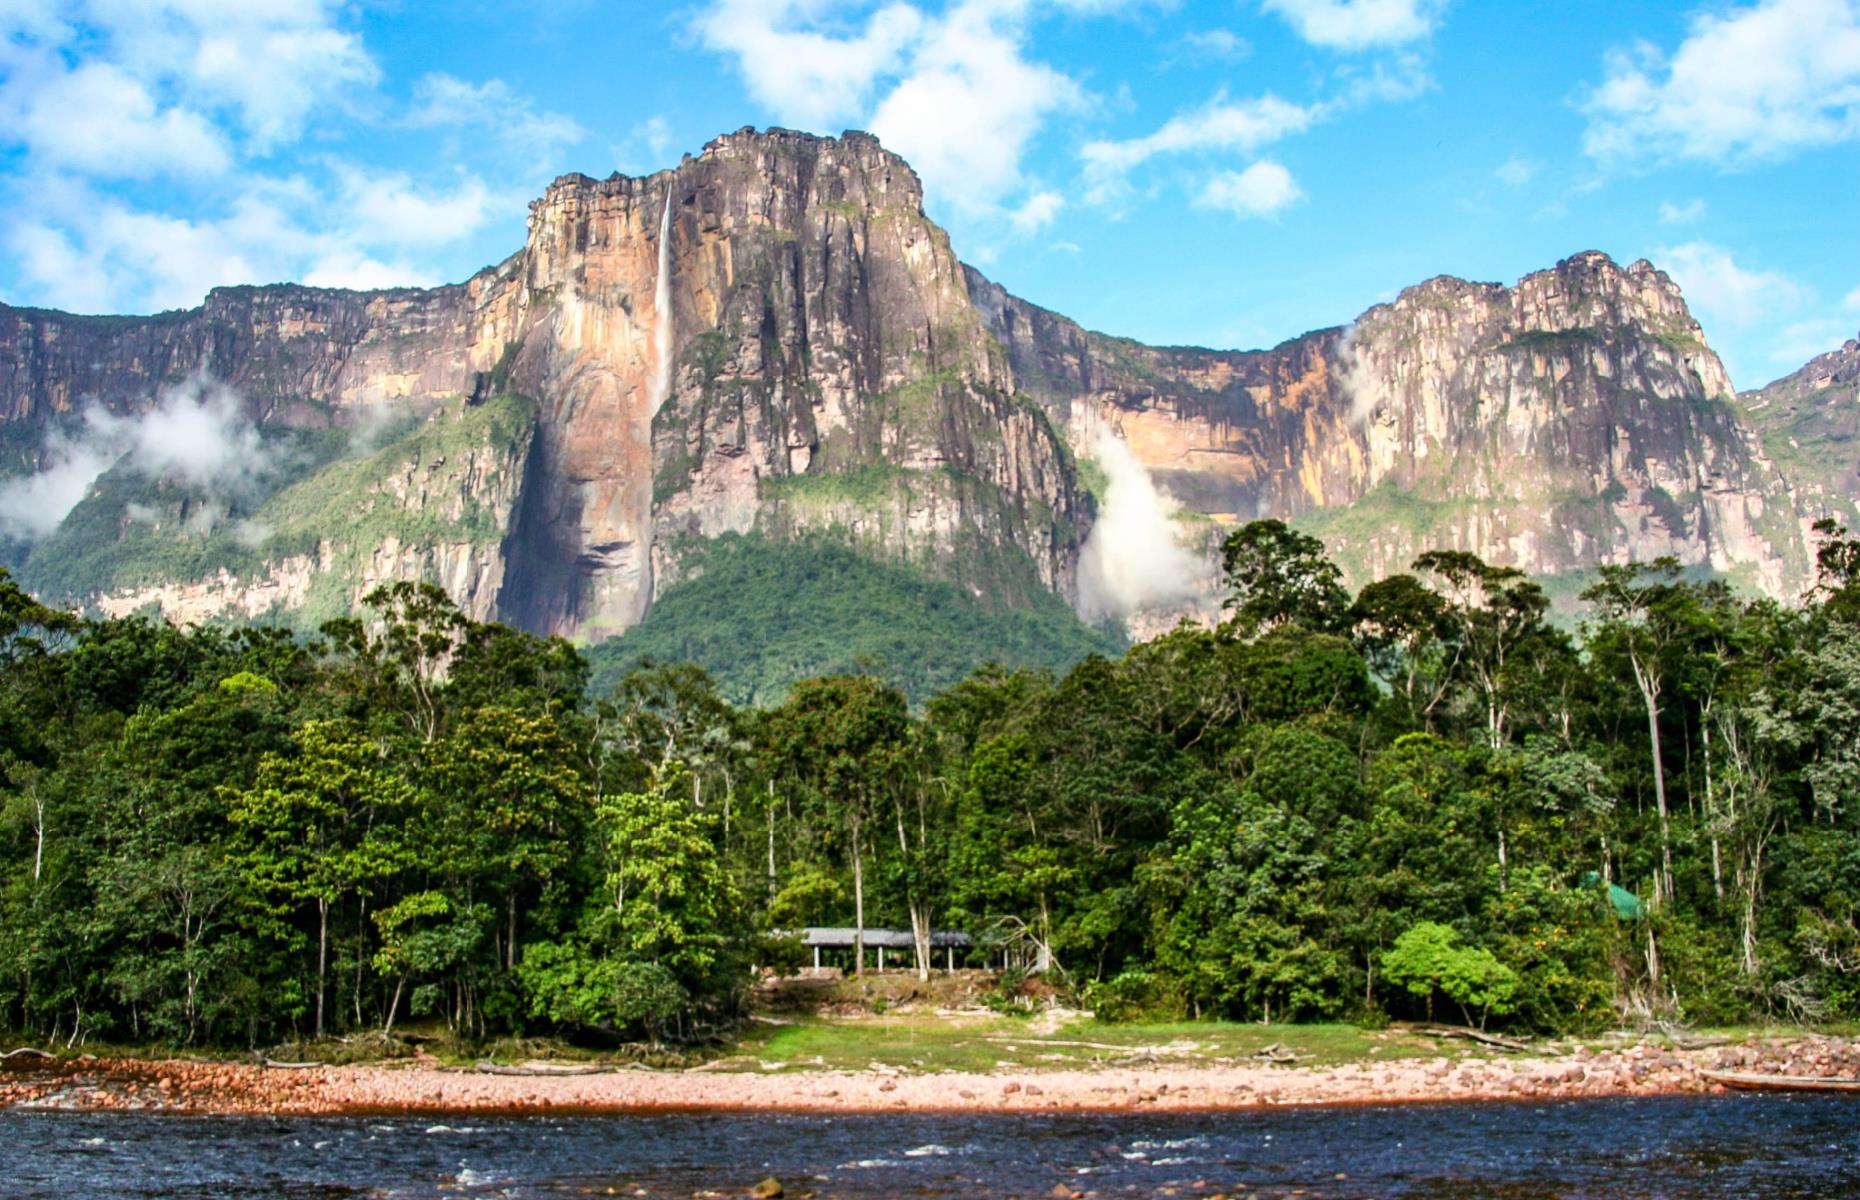 <p>As the site of Angel Falls – the tallest waterfall in the world – <a href="https://national-parks.org/venezuela/canaima">Canaima</a> isn’t a completely unknown entity, but many visitors don’t know that the 12,000-square mile (30,000sq km) park has a lot to offer beyond that one attraction. The area is filled with giant table-top plateau rock formations called tepuis that make up the bulk of the park. Hiking, canoeing to Angel Falls and wildlife spotting are the main activities here – the park is home to cougars, jaguars, giant armadillos and two-toed sloths, to name a few.</p>